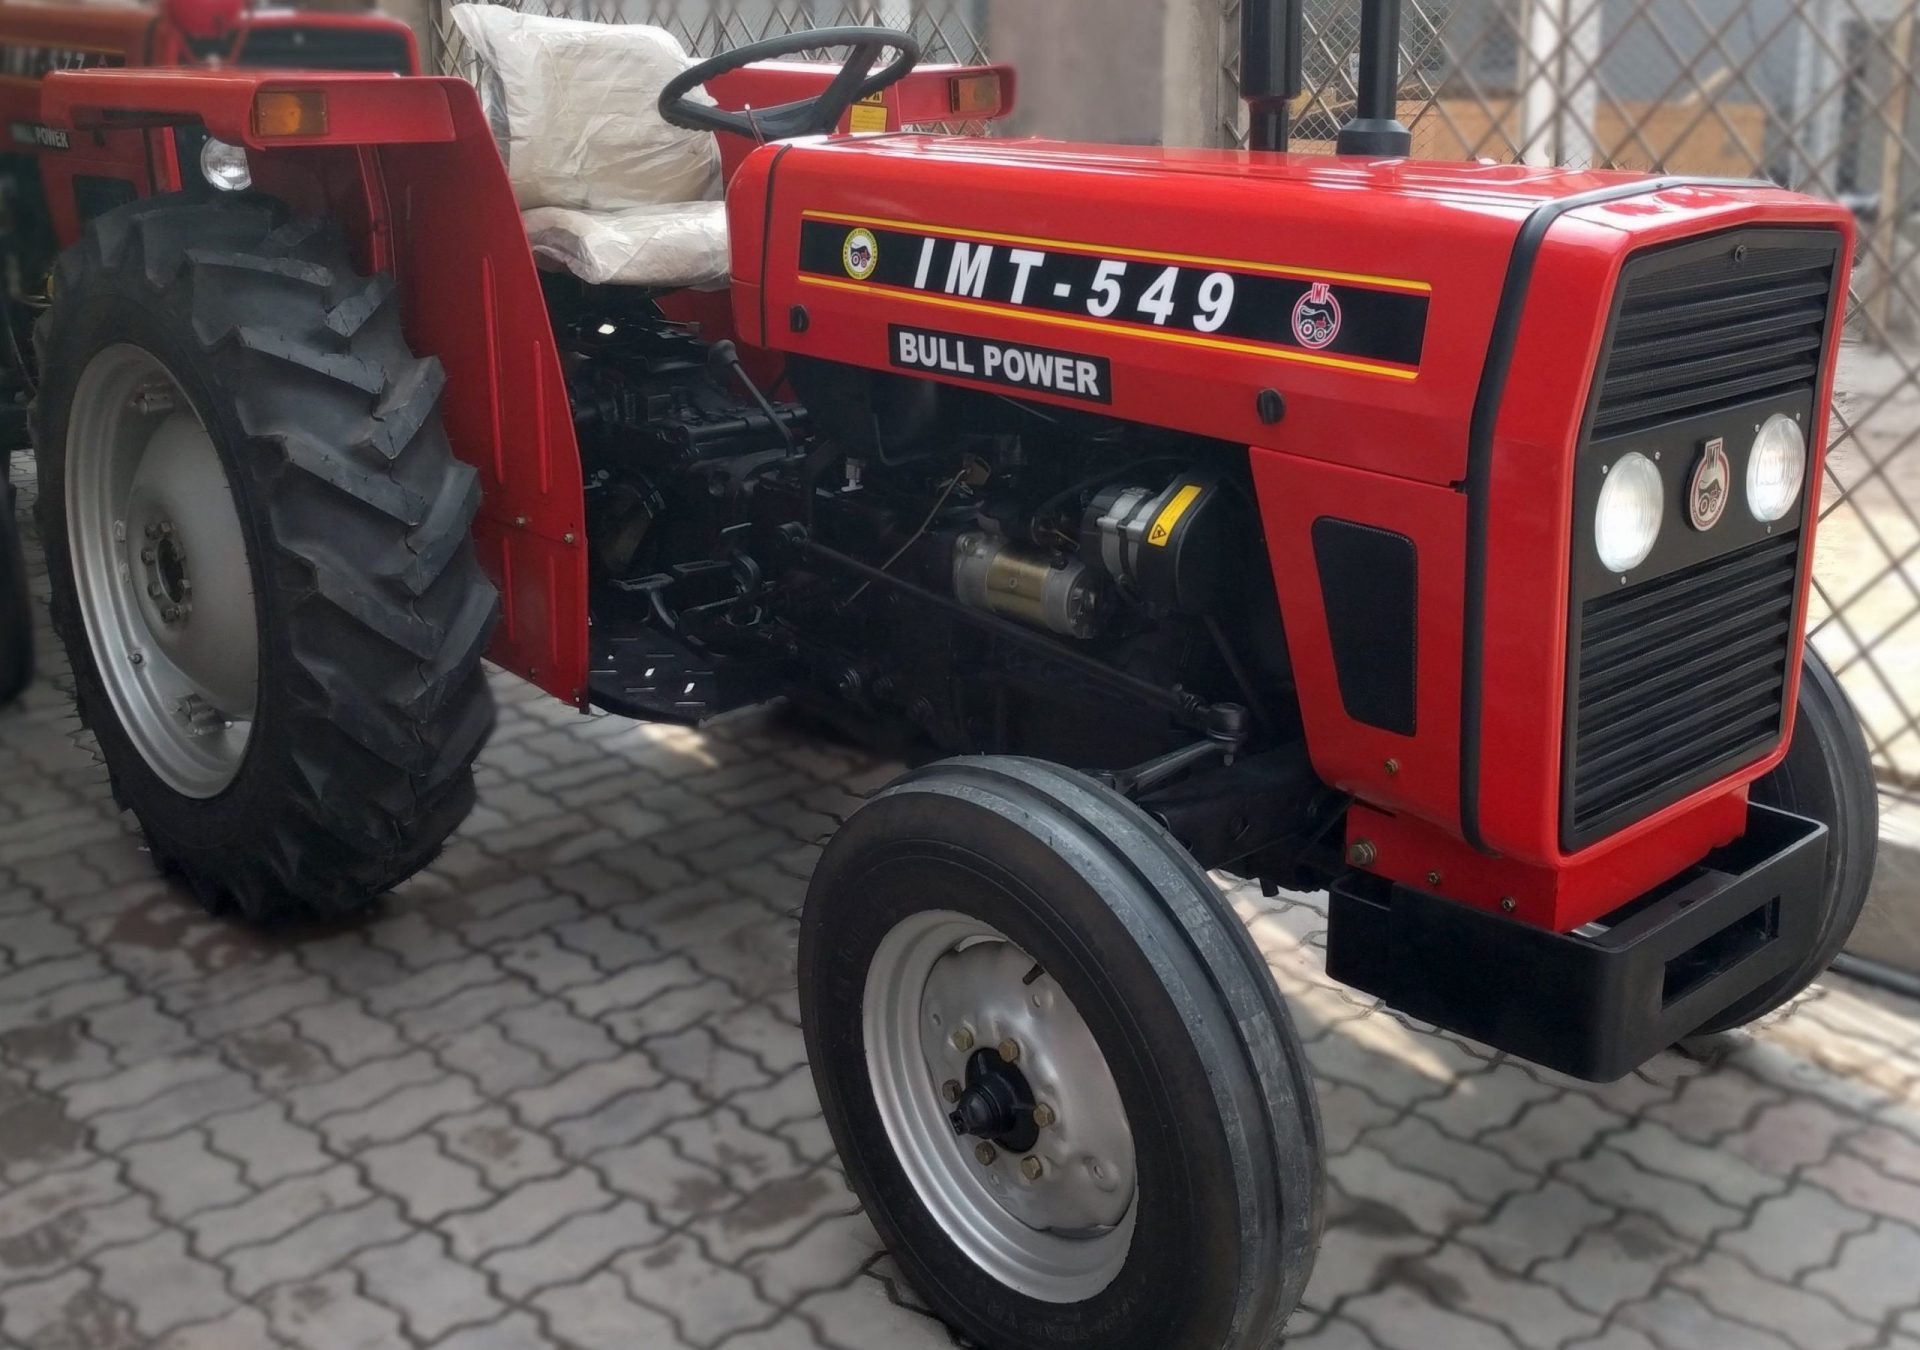 IMT 549 Tractor Price in Pakistan Specifications Features Power